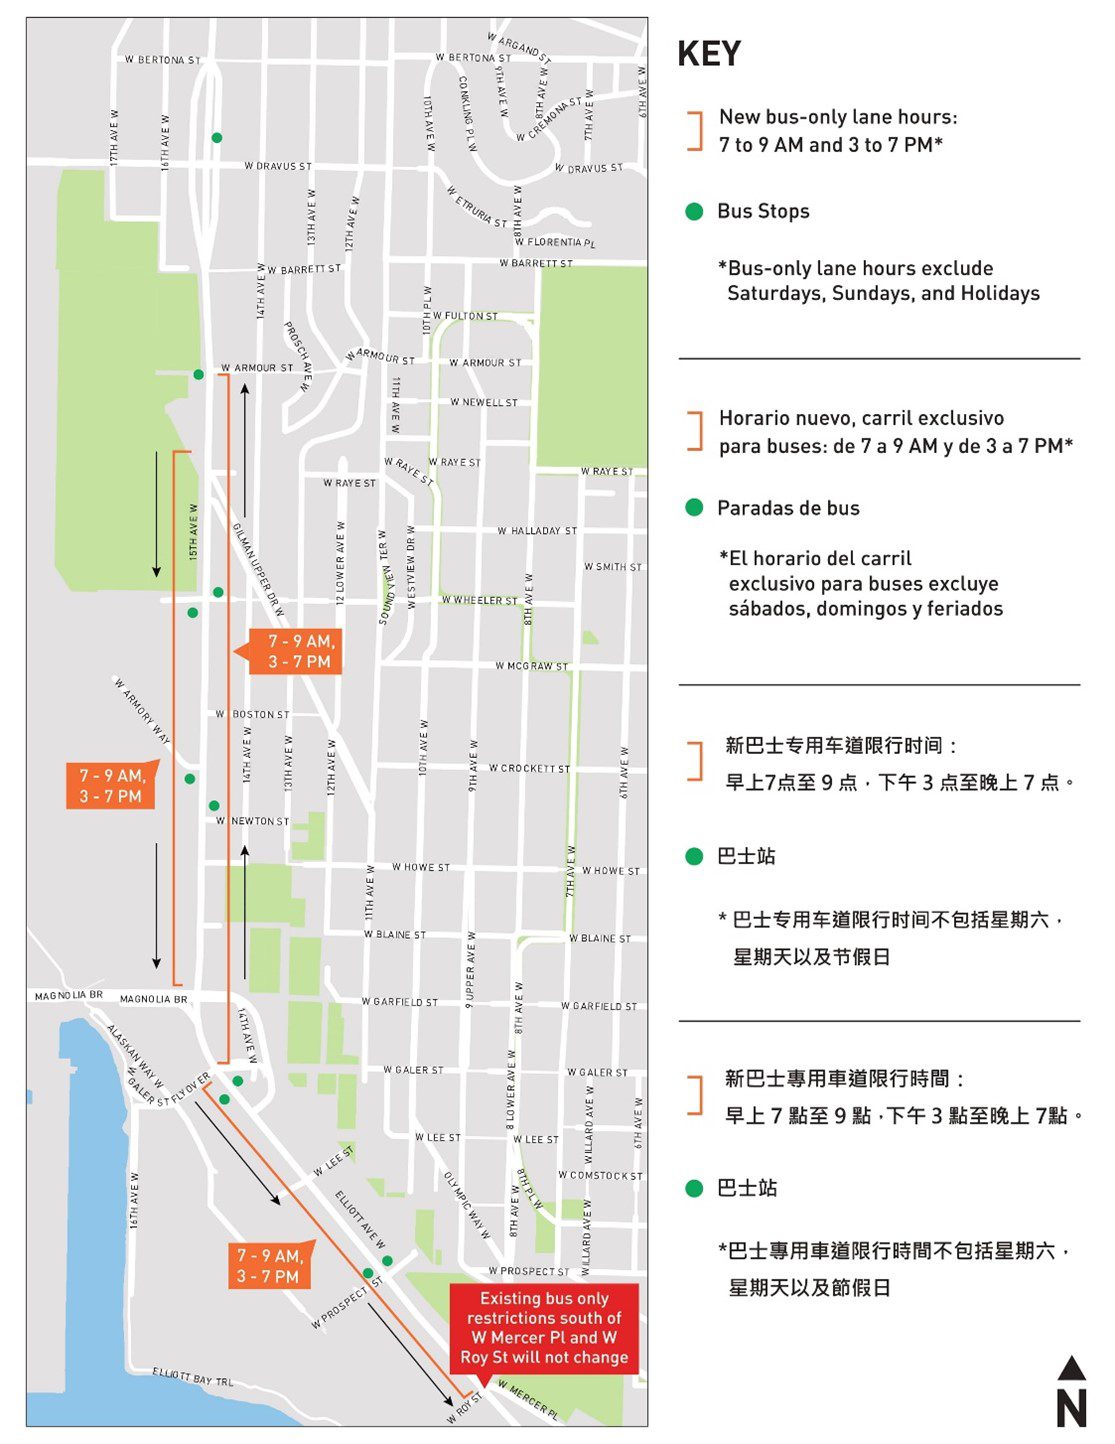 Map showing the locations of bus-only lanes along 15th Ave W and Elliott Ave W, where hours are being expanded to be from 7-9AM and 3-7PM. The locations of hours being expanded extend from W Armour St in the north to W Roy St in the south.